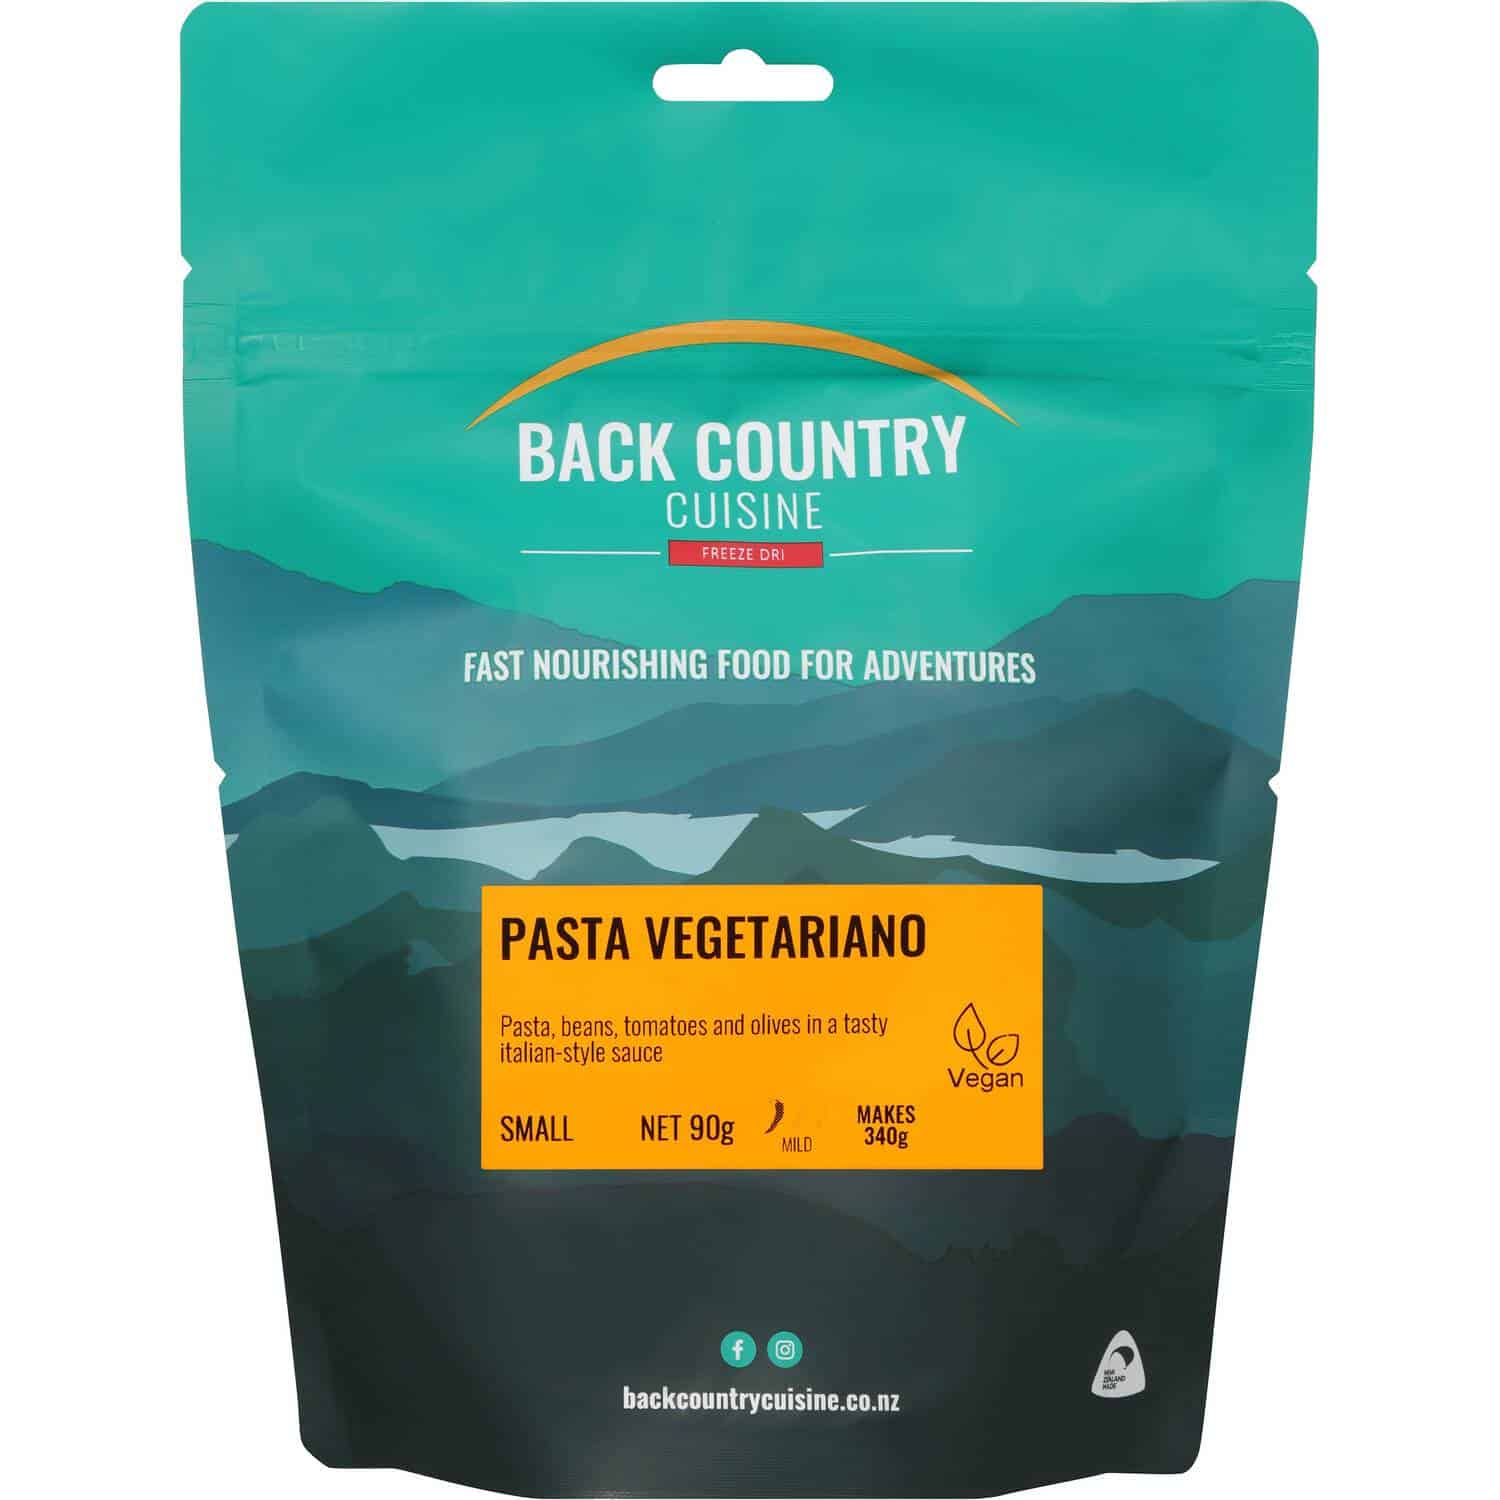 Back Country Cuisine Pasta Vegetariano Small - Tramping Food and Accessories sold by Venture Outdoors NZ